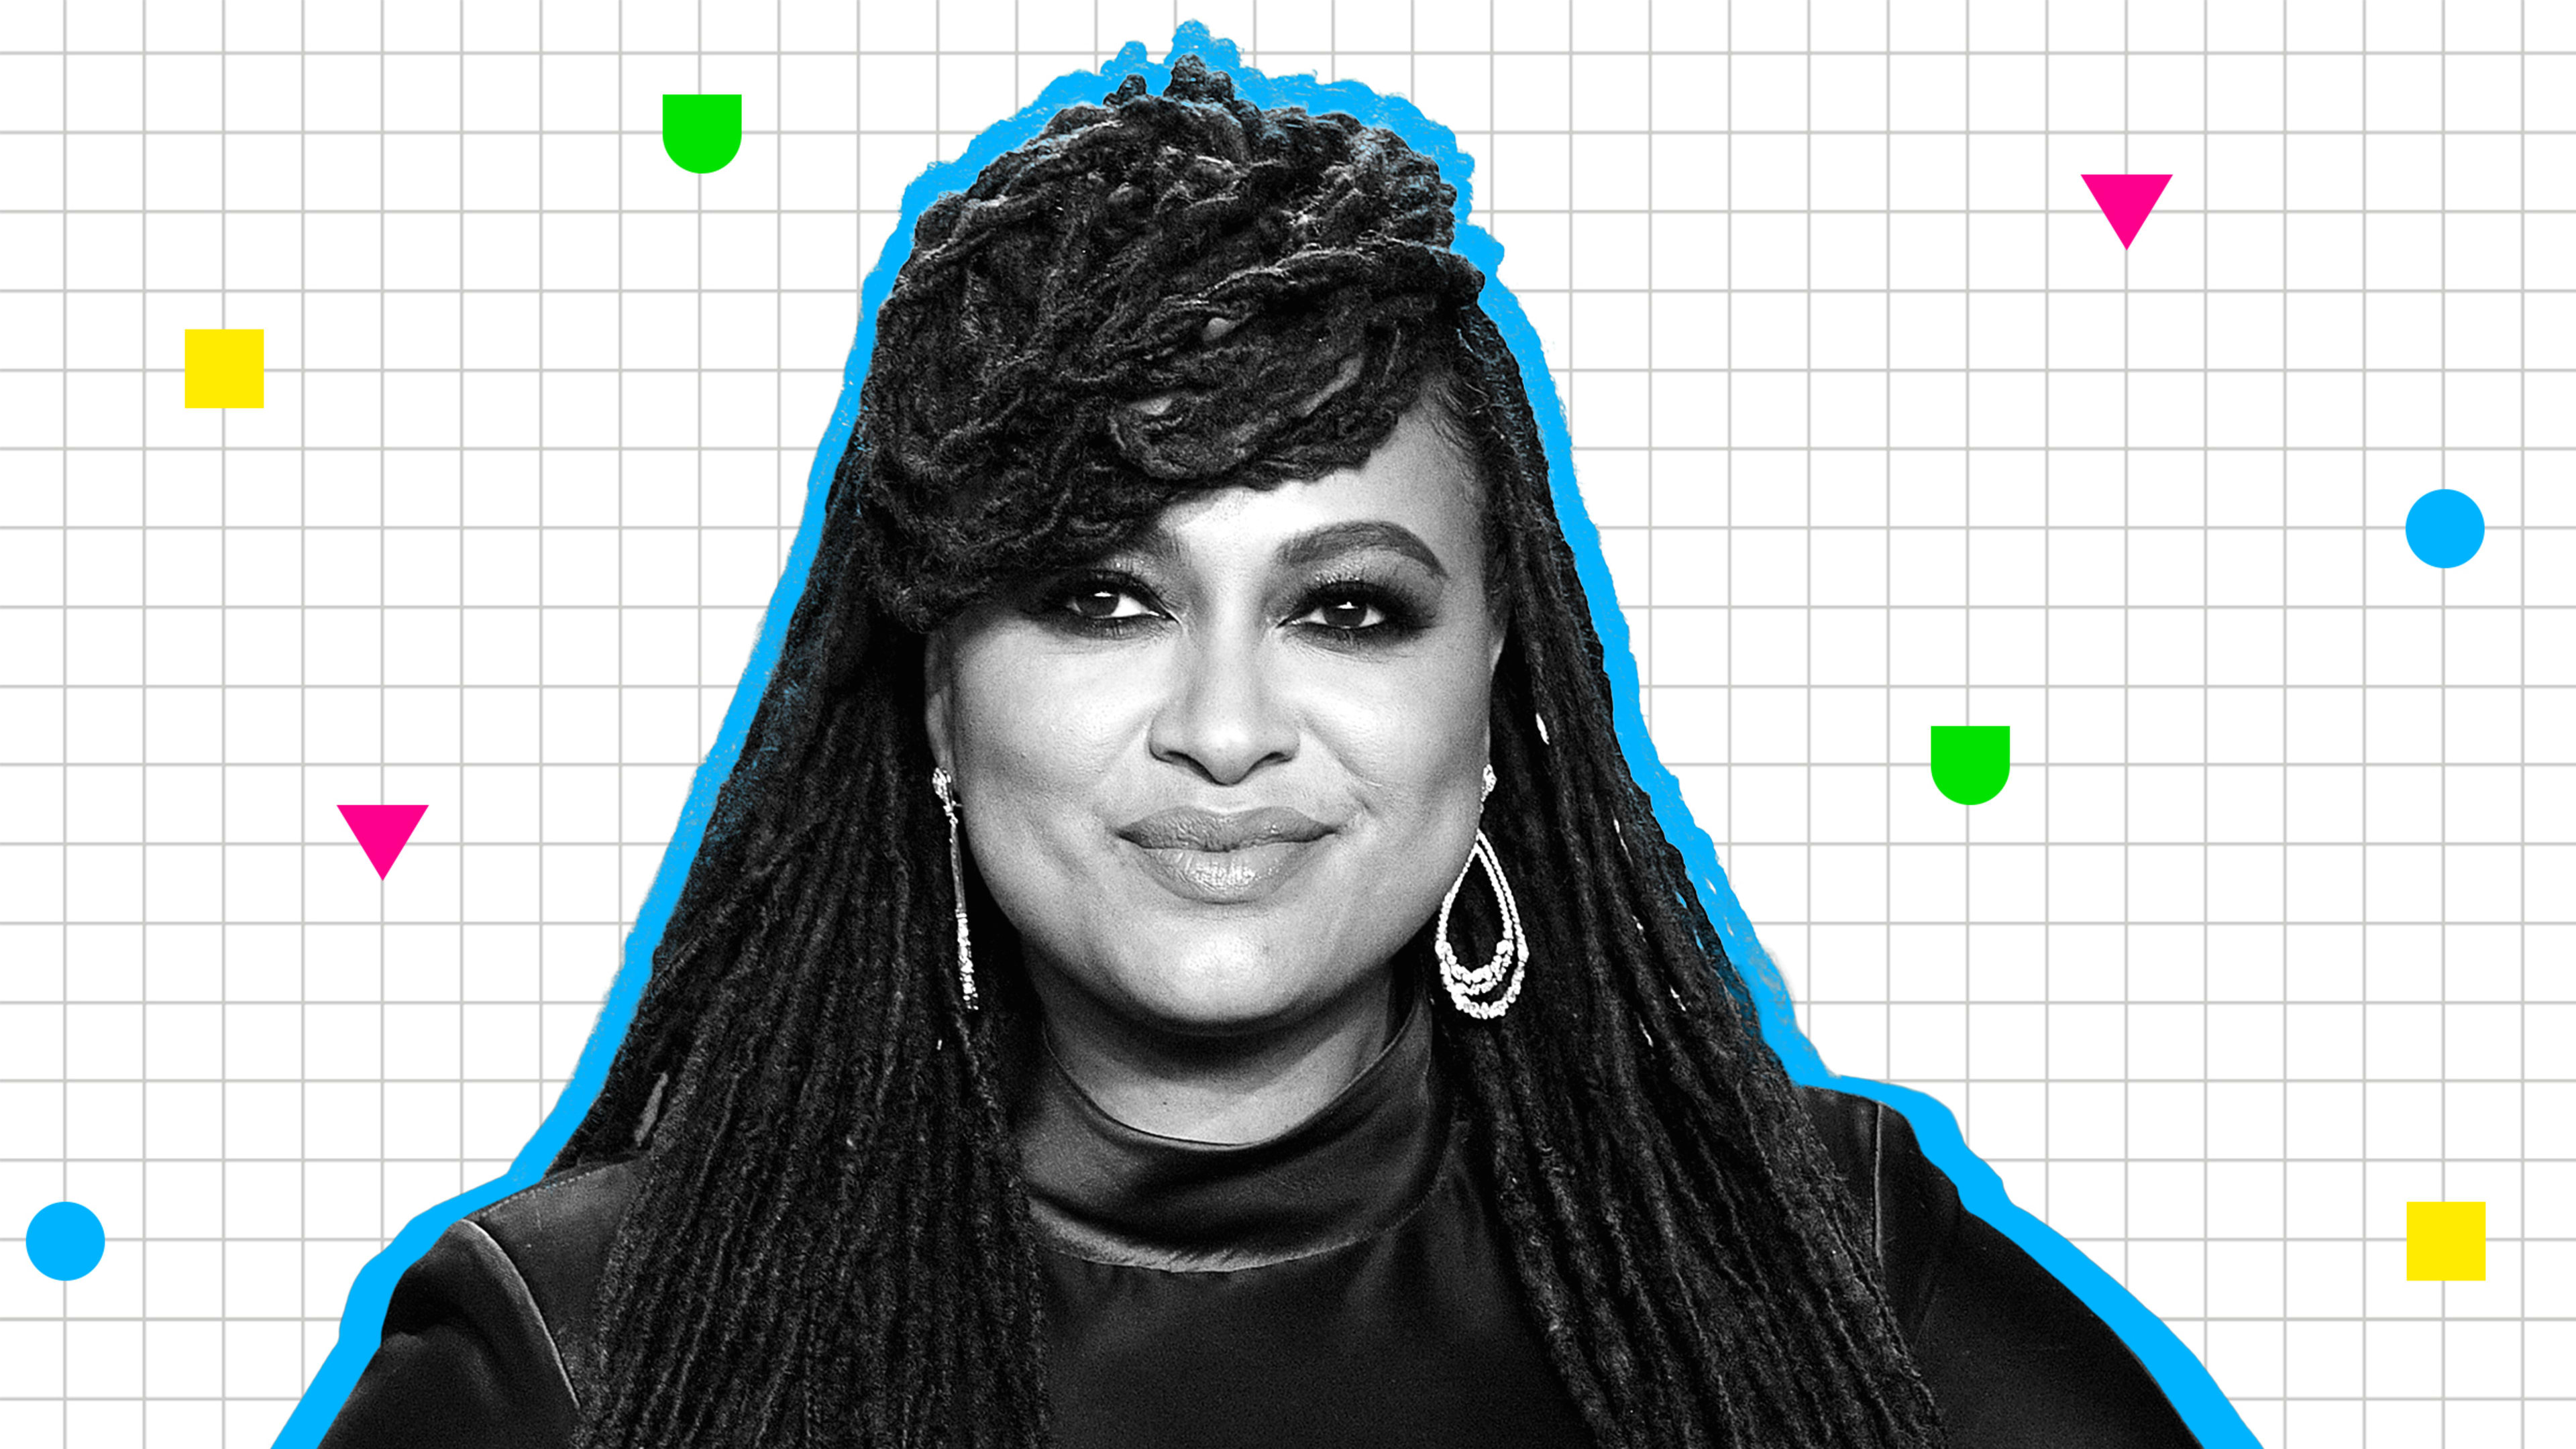 Ava DuVernay, CEOs of Lululemon and Global Citizen, to speak at Most Innovative Companies summit